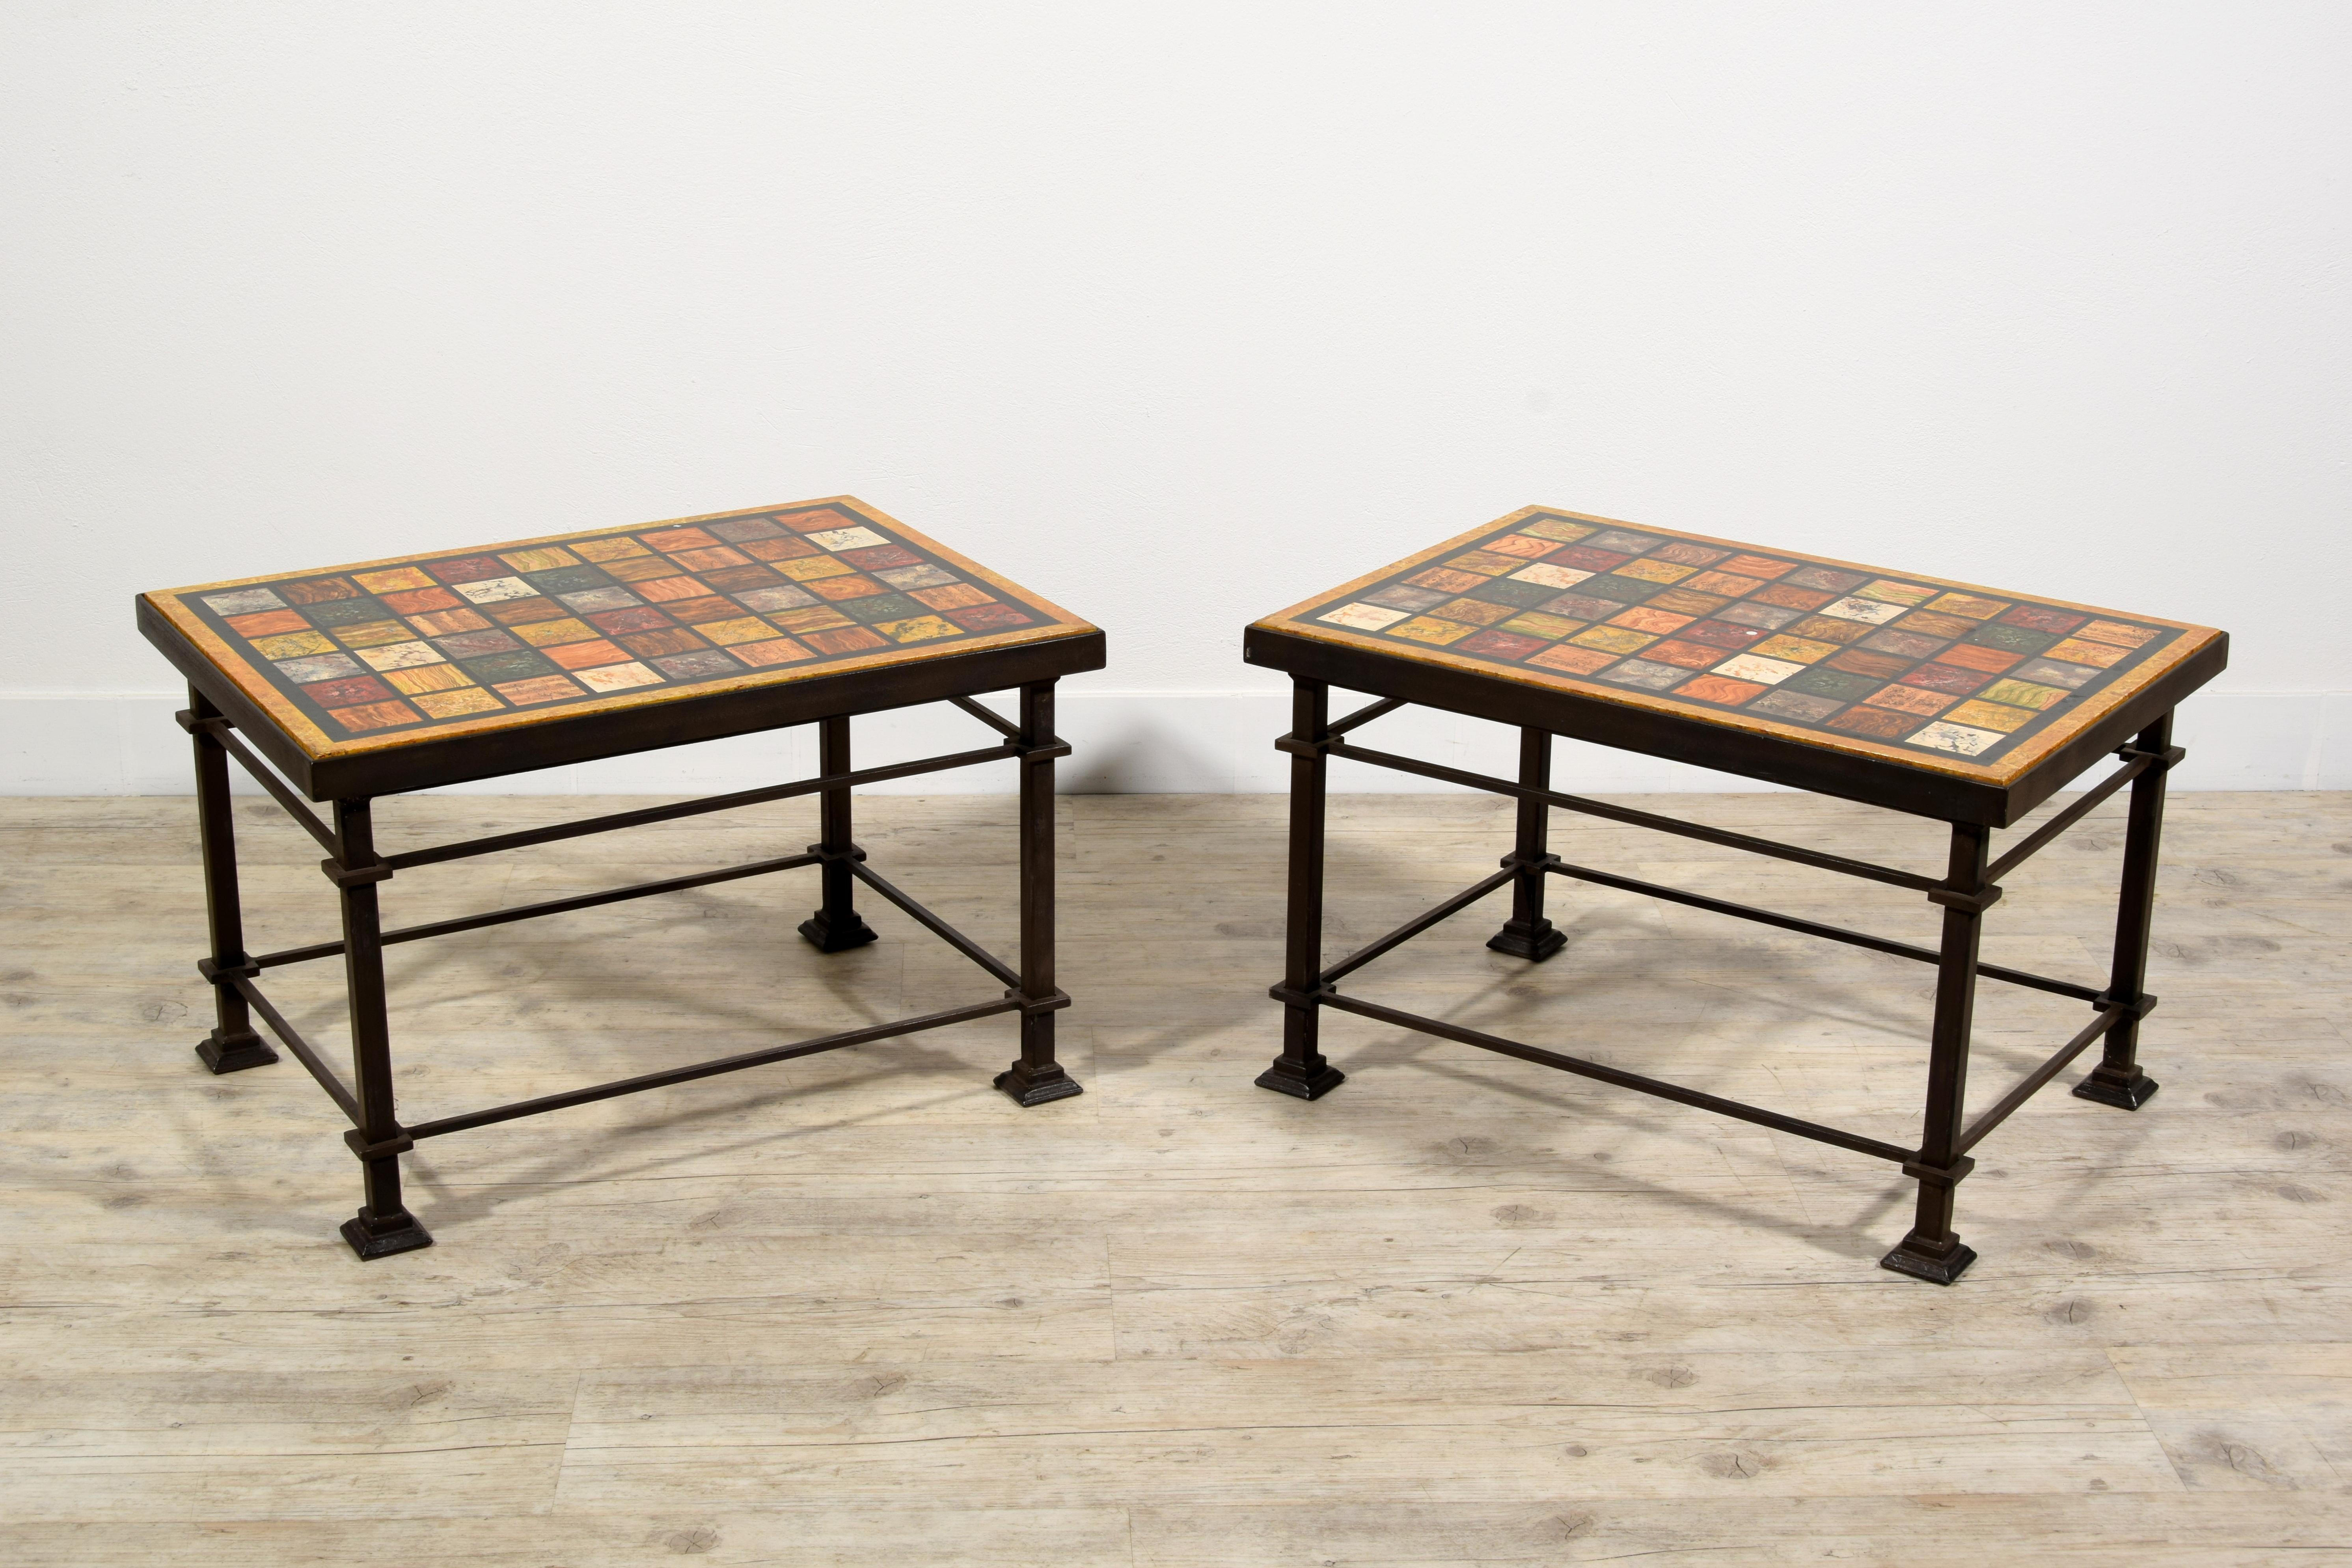 XXth Century, Pair of Roman Coffee Tables with Lacquered Wood Top
Measurements: single coffee table: cm W 71,5 x D 51,5 x H 45
assembled from the short side: cm 134 x 51,5
assembled from the long side: cm 103 x 71.5

The pair of tables was made